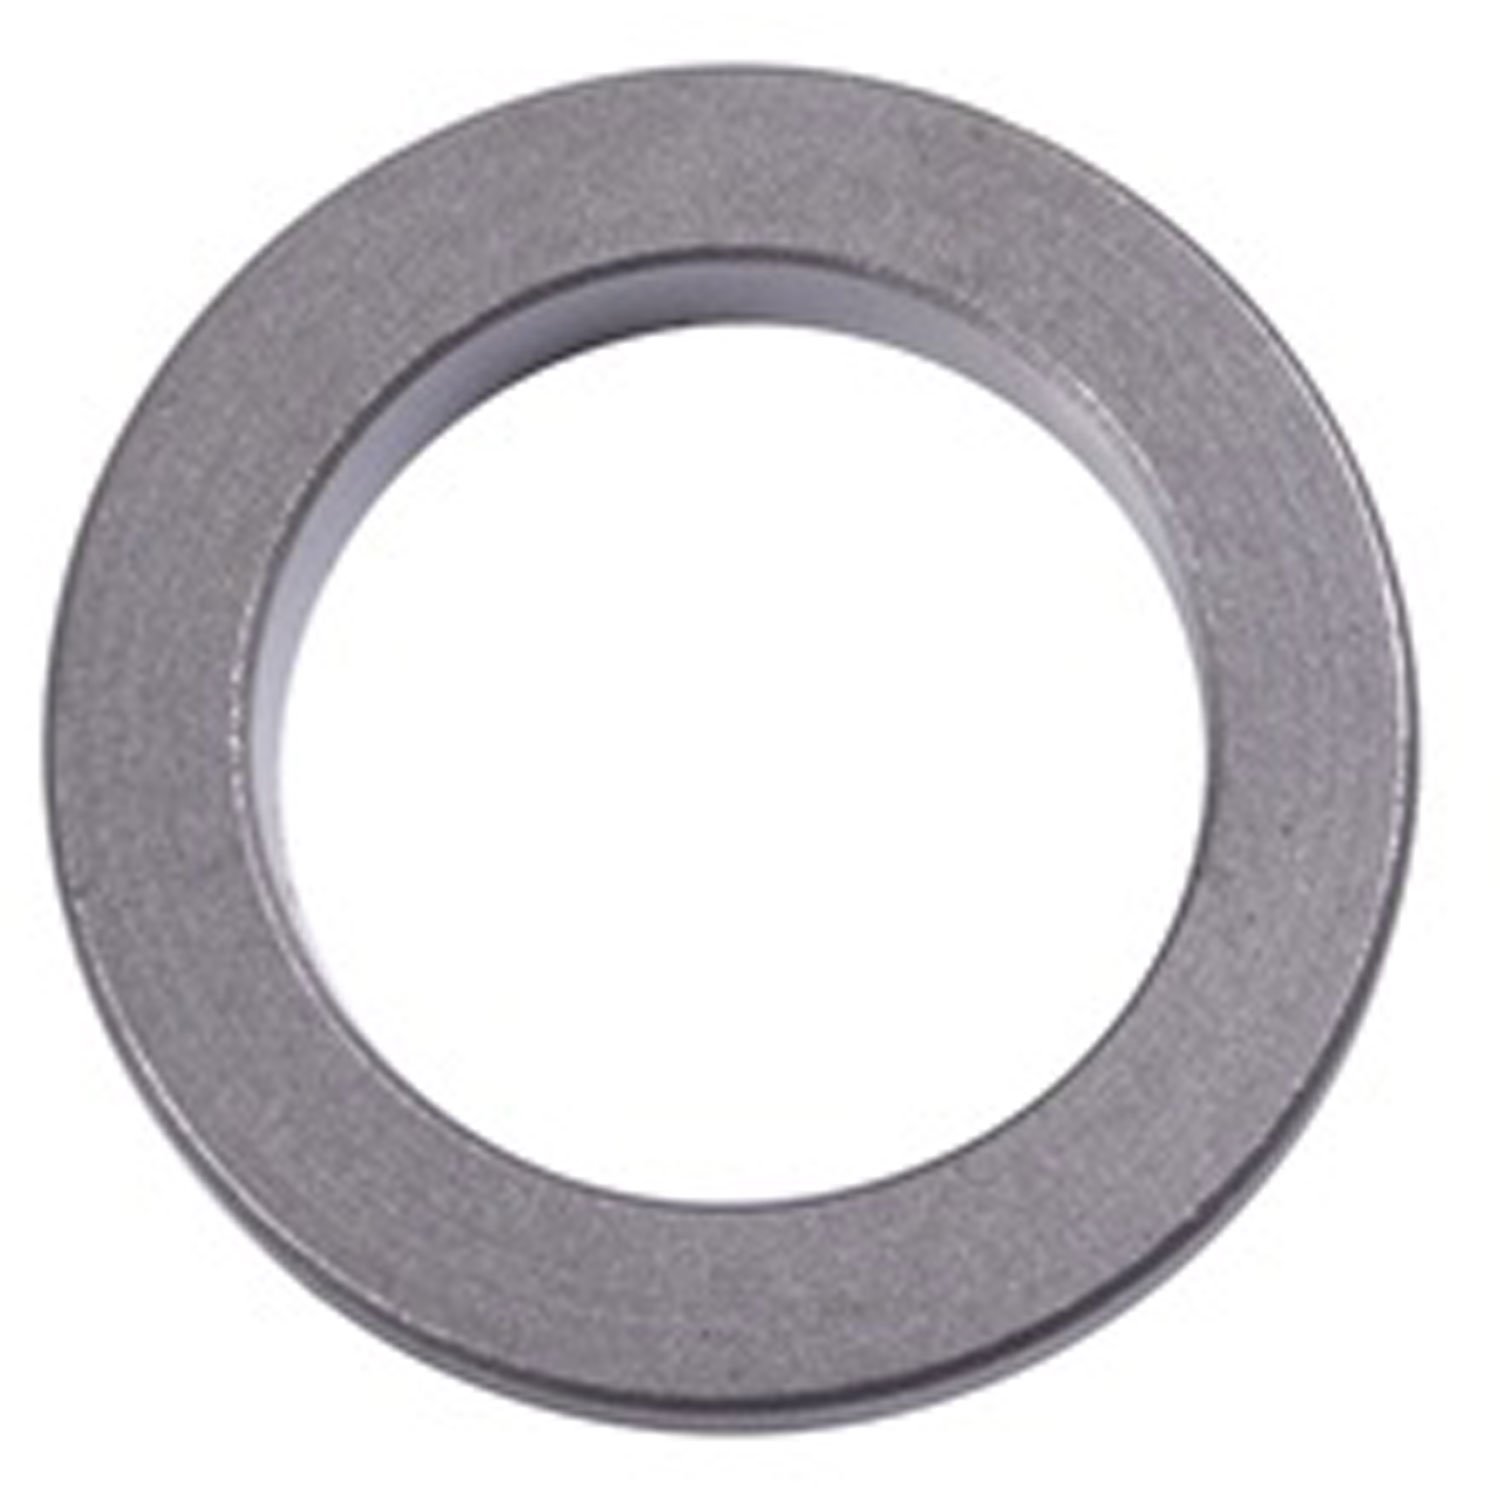 Axle shaft bearing retainer ring for Dana 44 rear axle in 1986 Jeep CJ7s and CJ8s. Also fits the axl